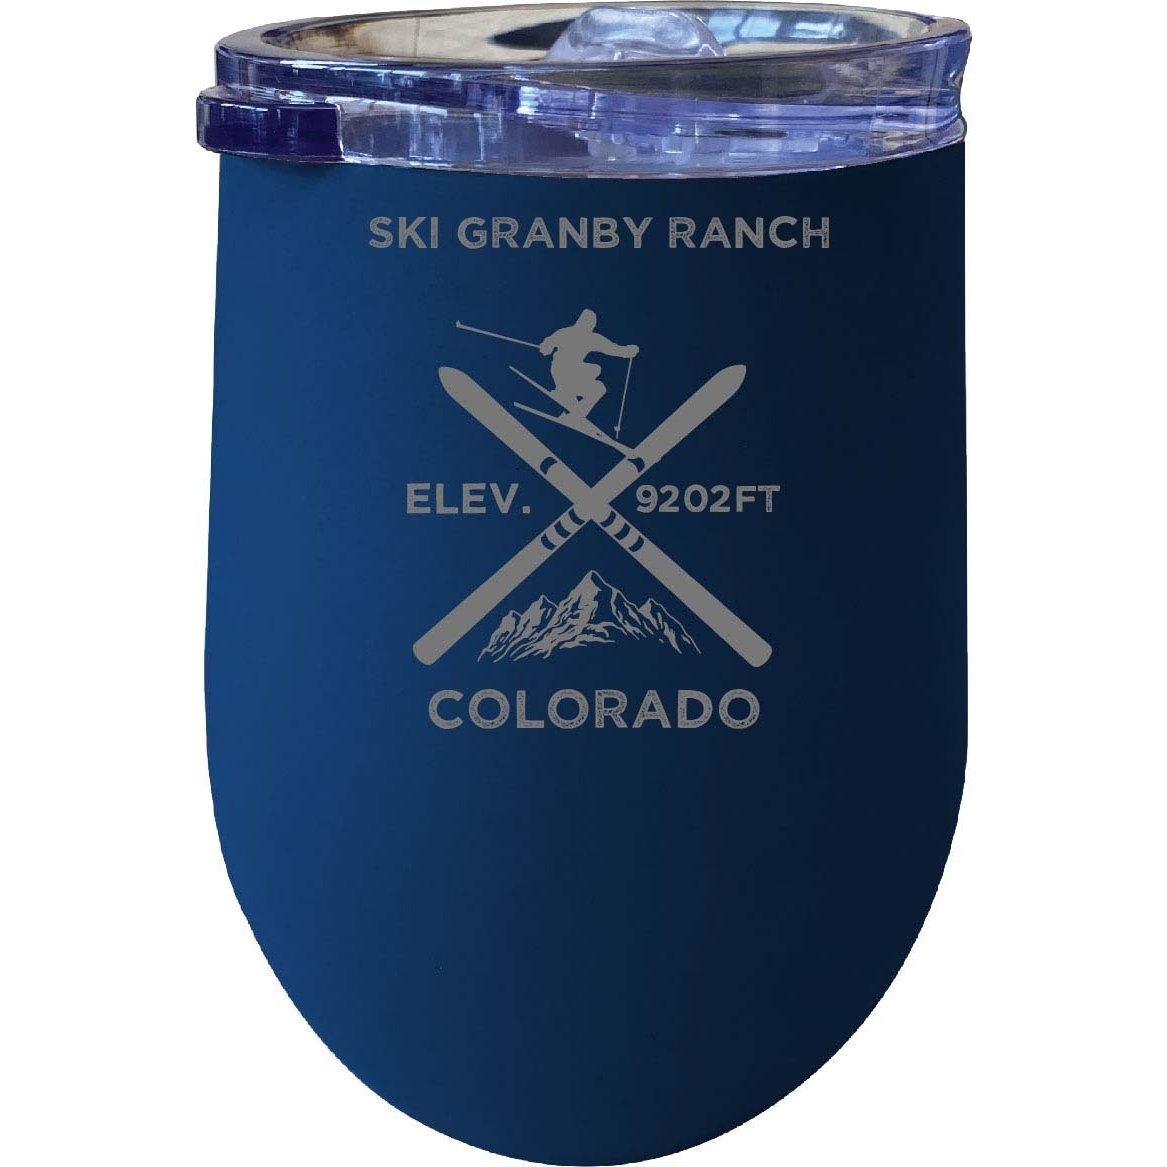 Ski Granby Ranch Colorado Ski Souvenir 12 Oz Laser Etched Insulated Wine Stainless Steel Tumbler - Rose Gold